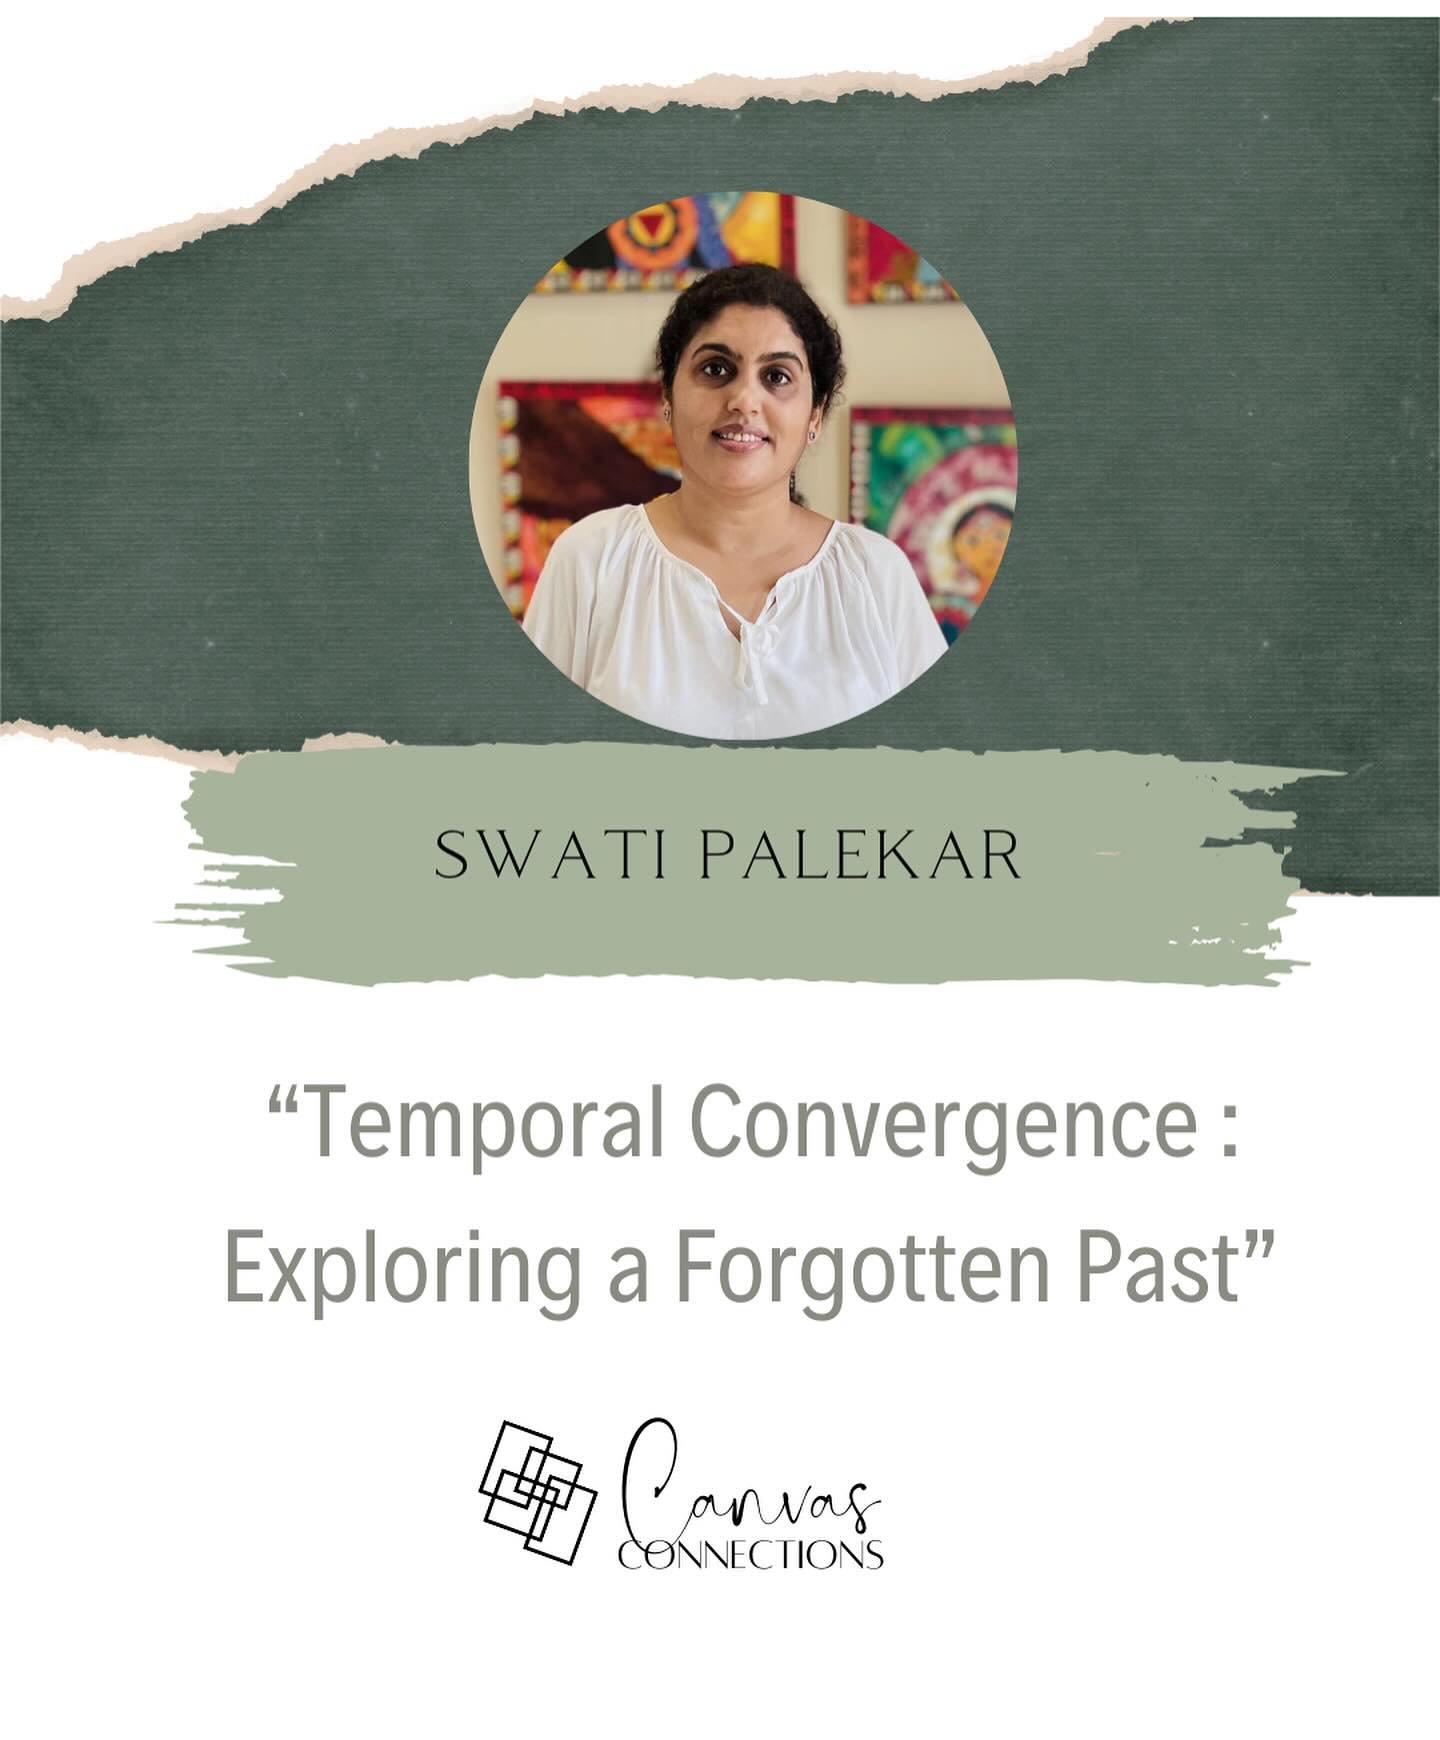 Swati Palekar is an Indian-born visual folk artist currently based in Singapore, with an interest in endangered Indian Folk/Tribal art. She is the Founder of Swayam Folkart, an artistic enterprise that she founded in 2012 after a decade-long stint in